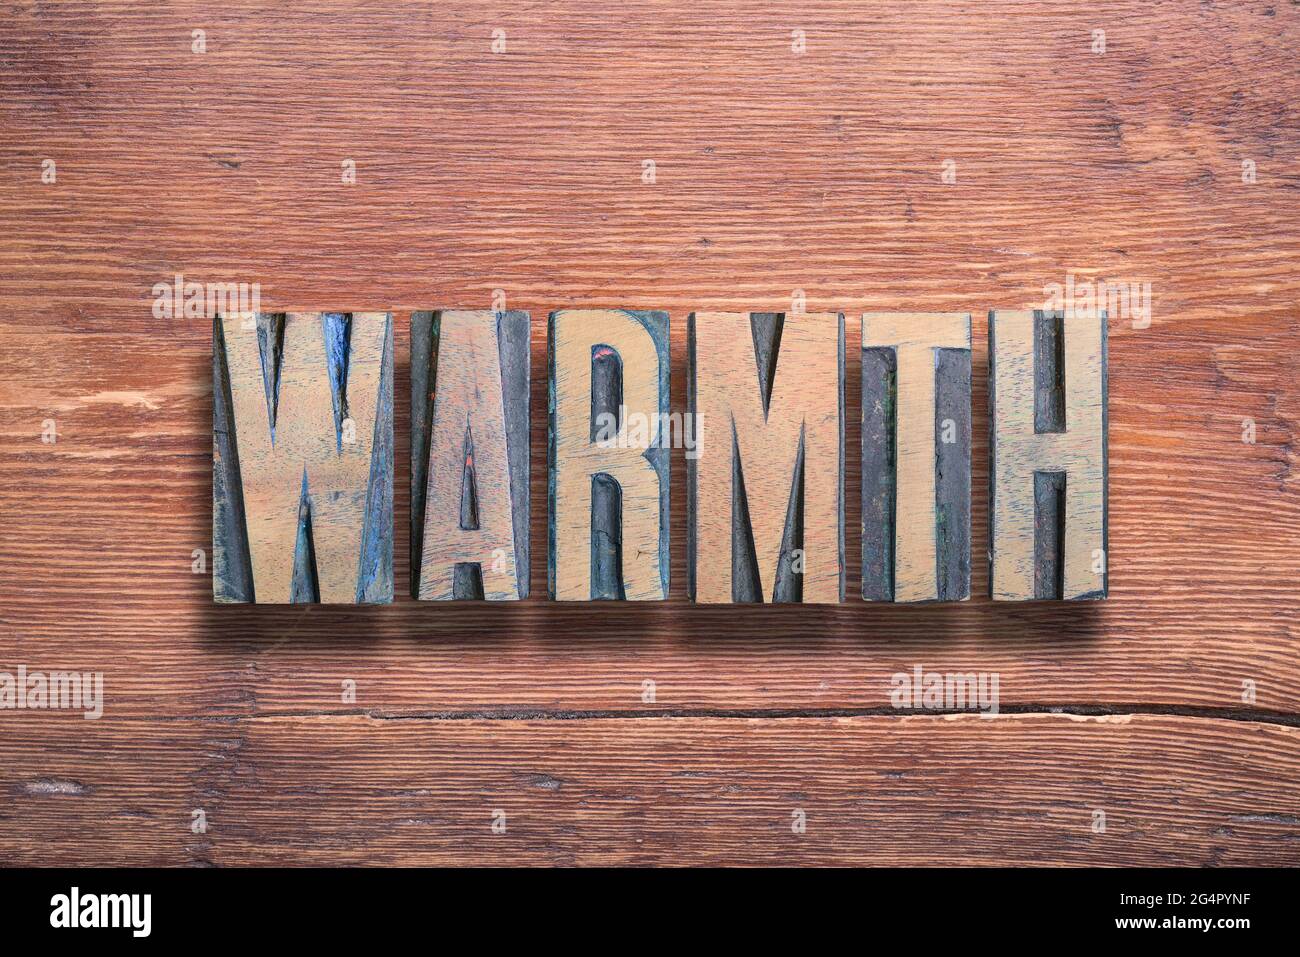 warmth word combined on vintage varnished wooden surface Stock Photo